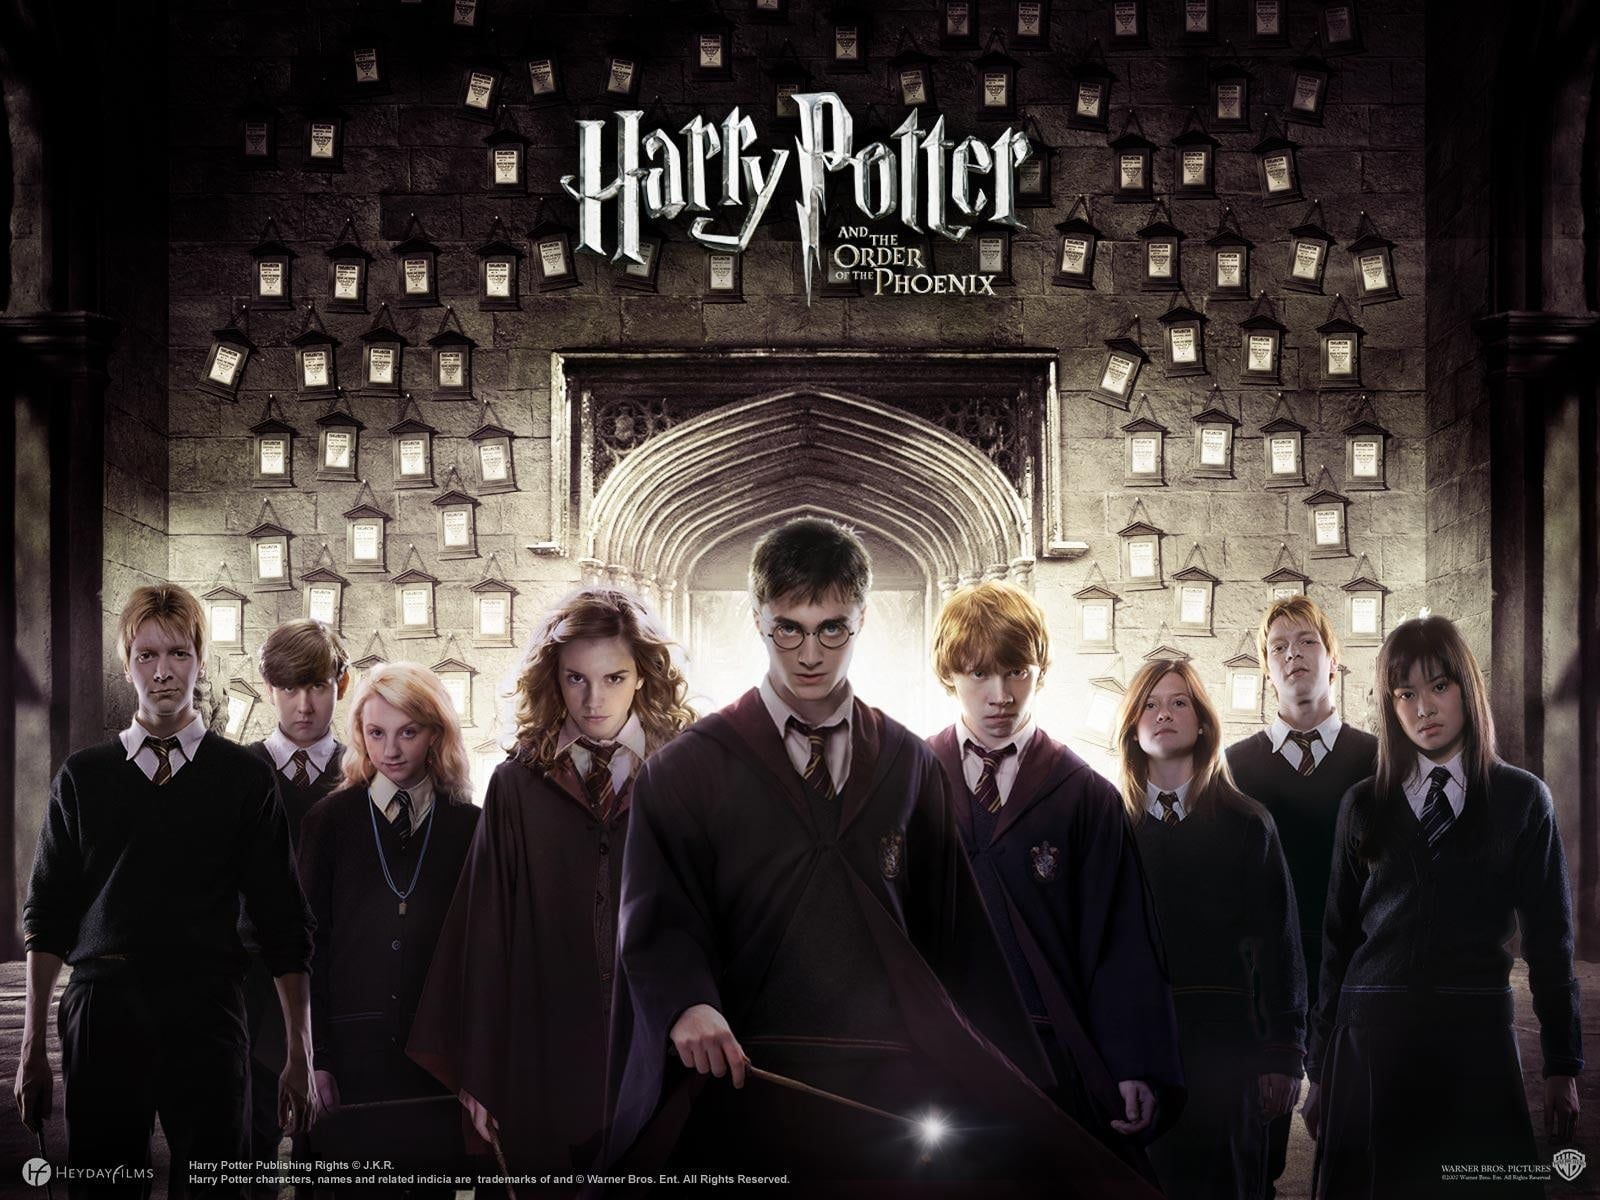 Harry Potter Group Photo Wallpapers